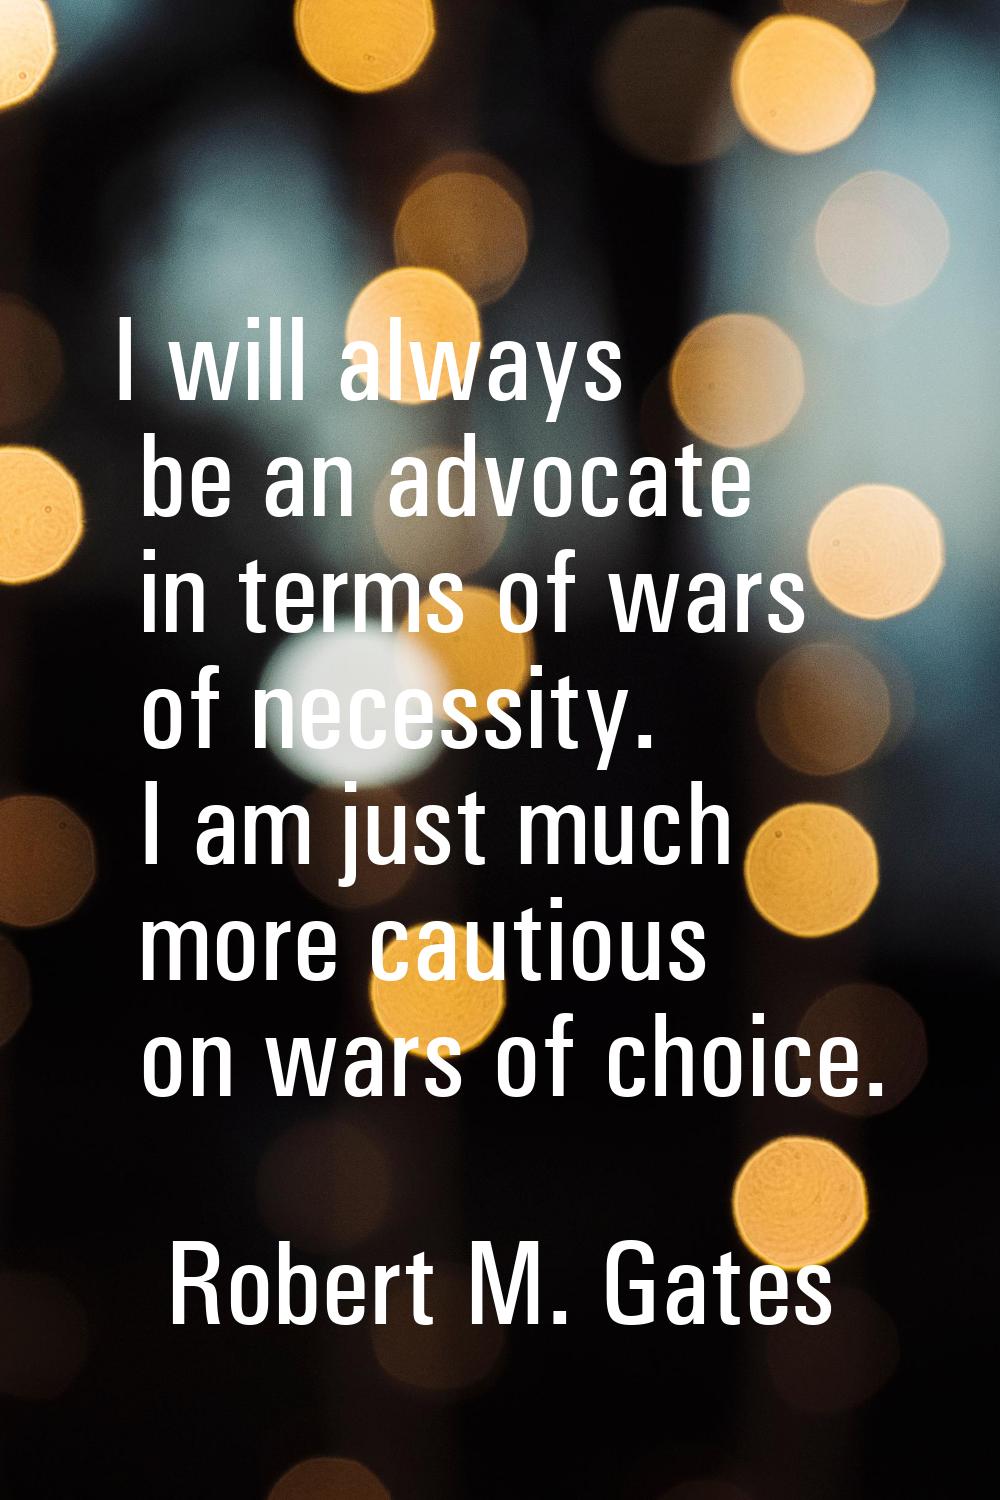 I will always be an advocate in terms of wars of necessity. I am just much more cautious on wars of